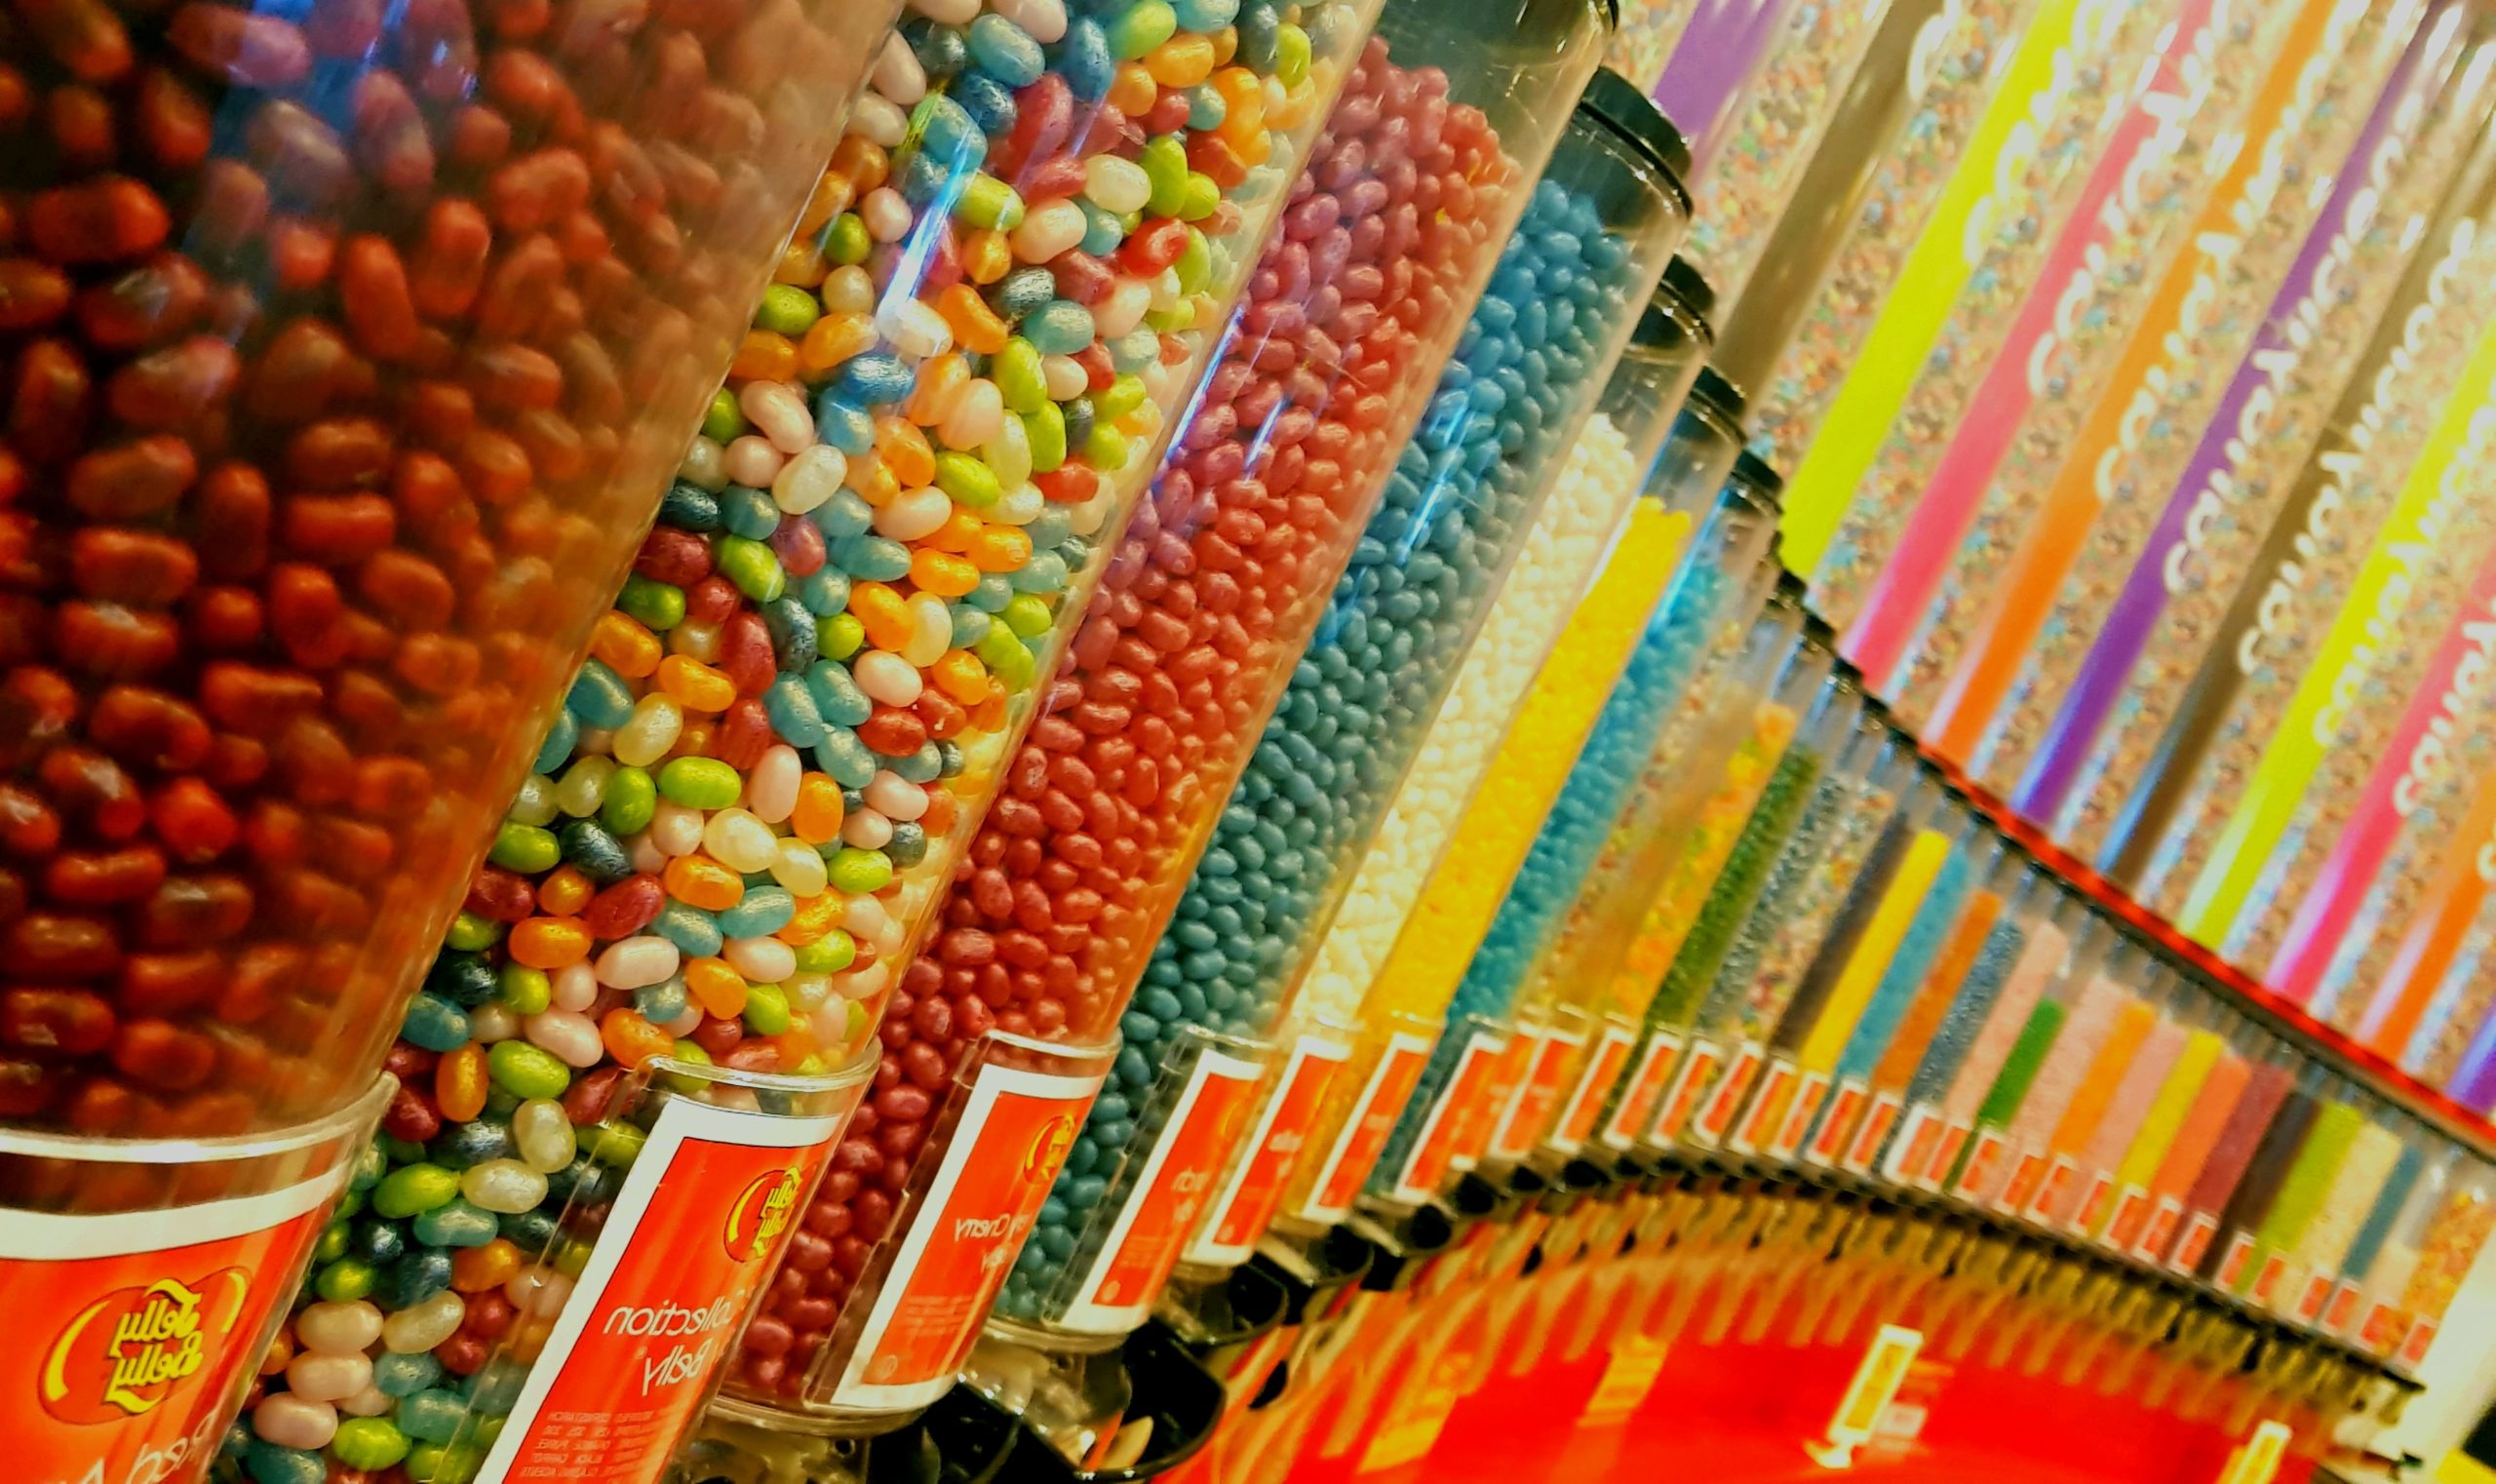 A color photo of rows of glass containers filled with colorful jelly beans.